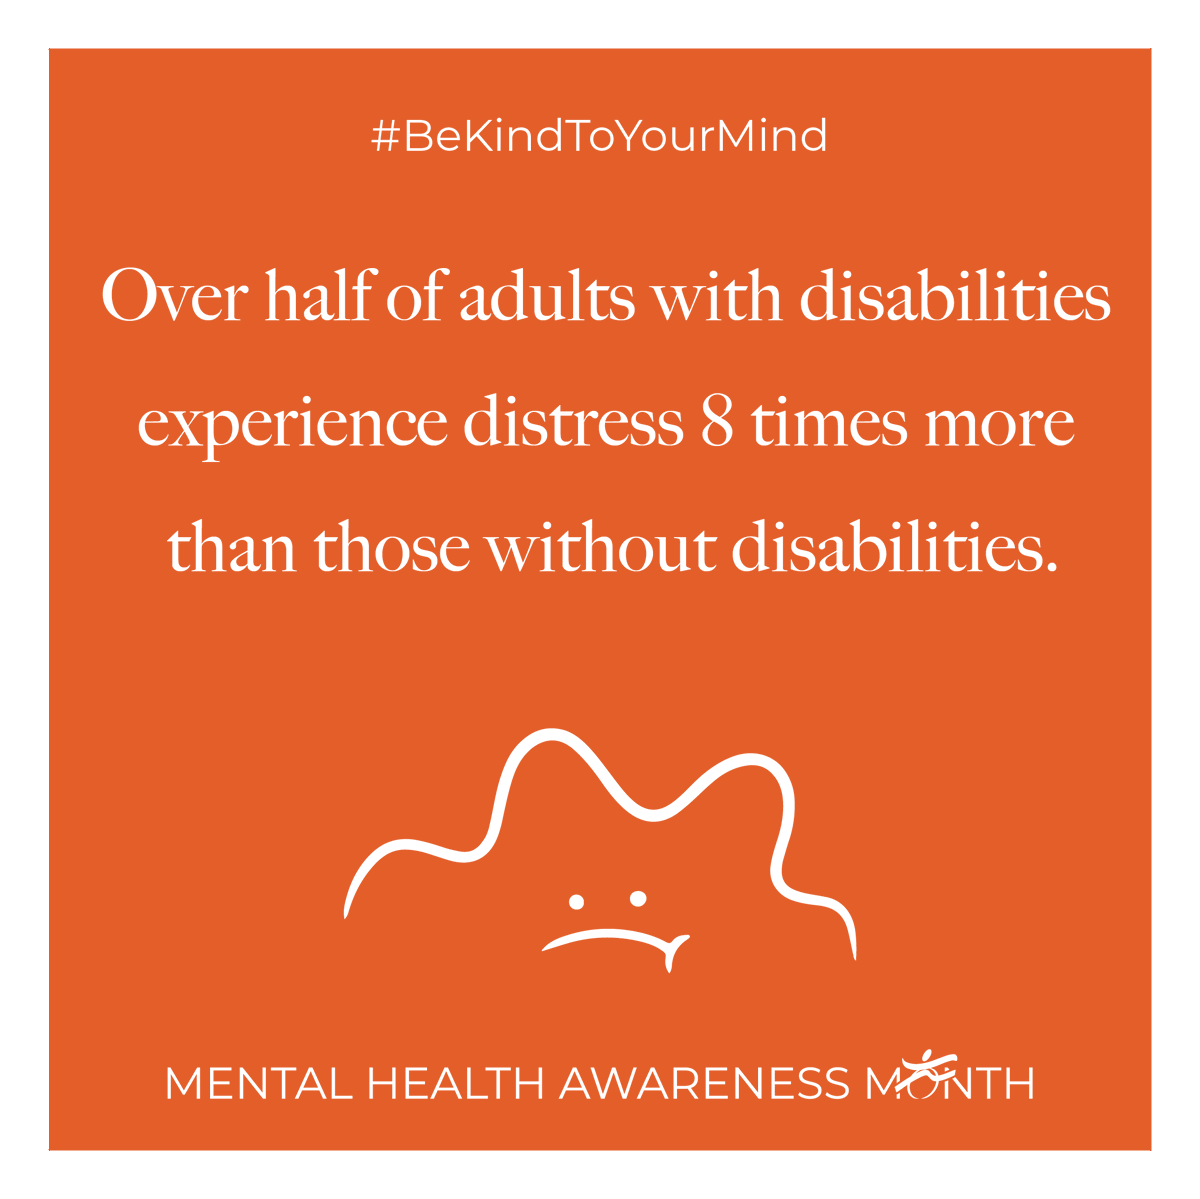 People with disabilities face greater mental health challenges. This Mental Health Awareness Month, we’ve teamed up with our partner @NCHPAD to promote #BeKindToYourMind for improved mental well-being. Check out their site for more info ▶️brnw.ch/21wJPXu #InclusiveHealth